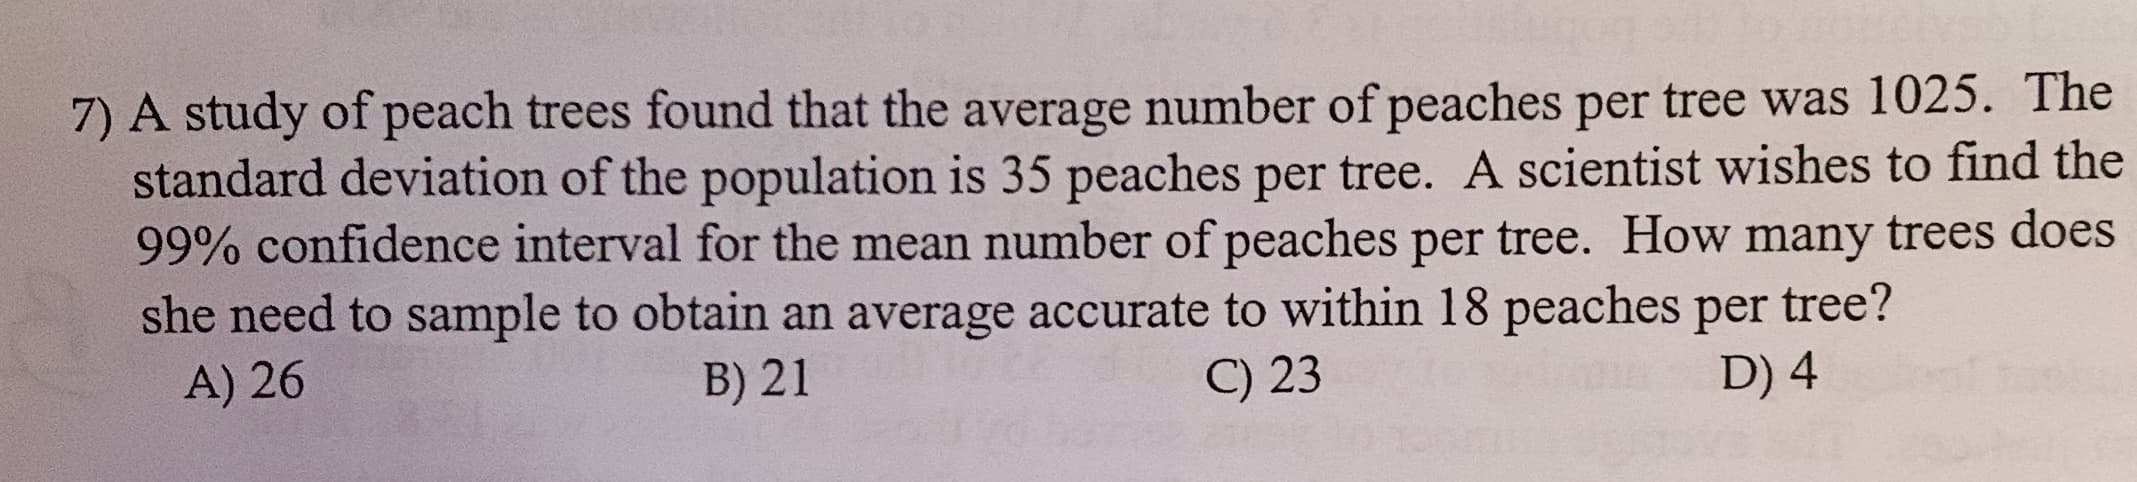 7) A study of peach trees found that the average number of peaches per tree was 1025. The
standard deviation of the population is 35 peaches per tree. A scientist wishes to find the
99% confidence interval for the mean number of peaches per
she need to sample to obtain an average accurate to within 18 peaches per tree?
tree. How many trees does
A) 26
B) 21
) 23
D) 4
